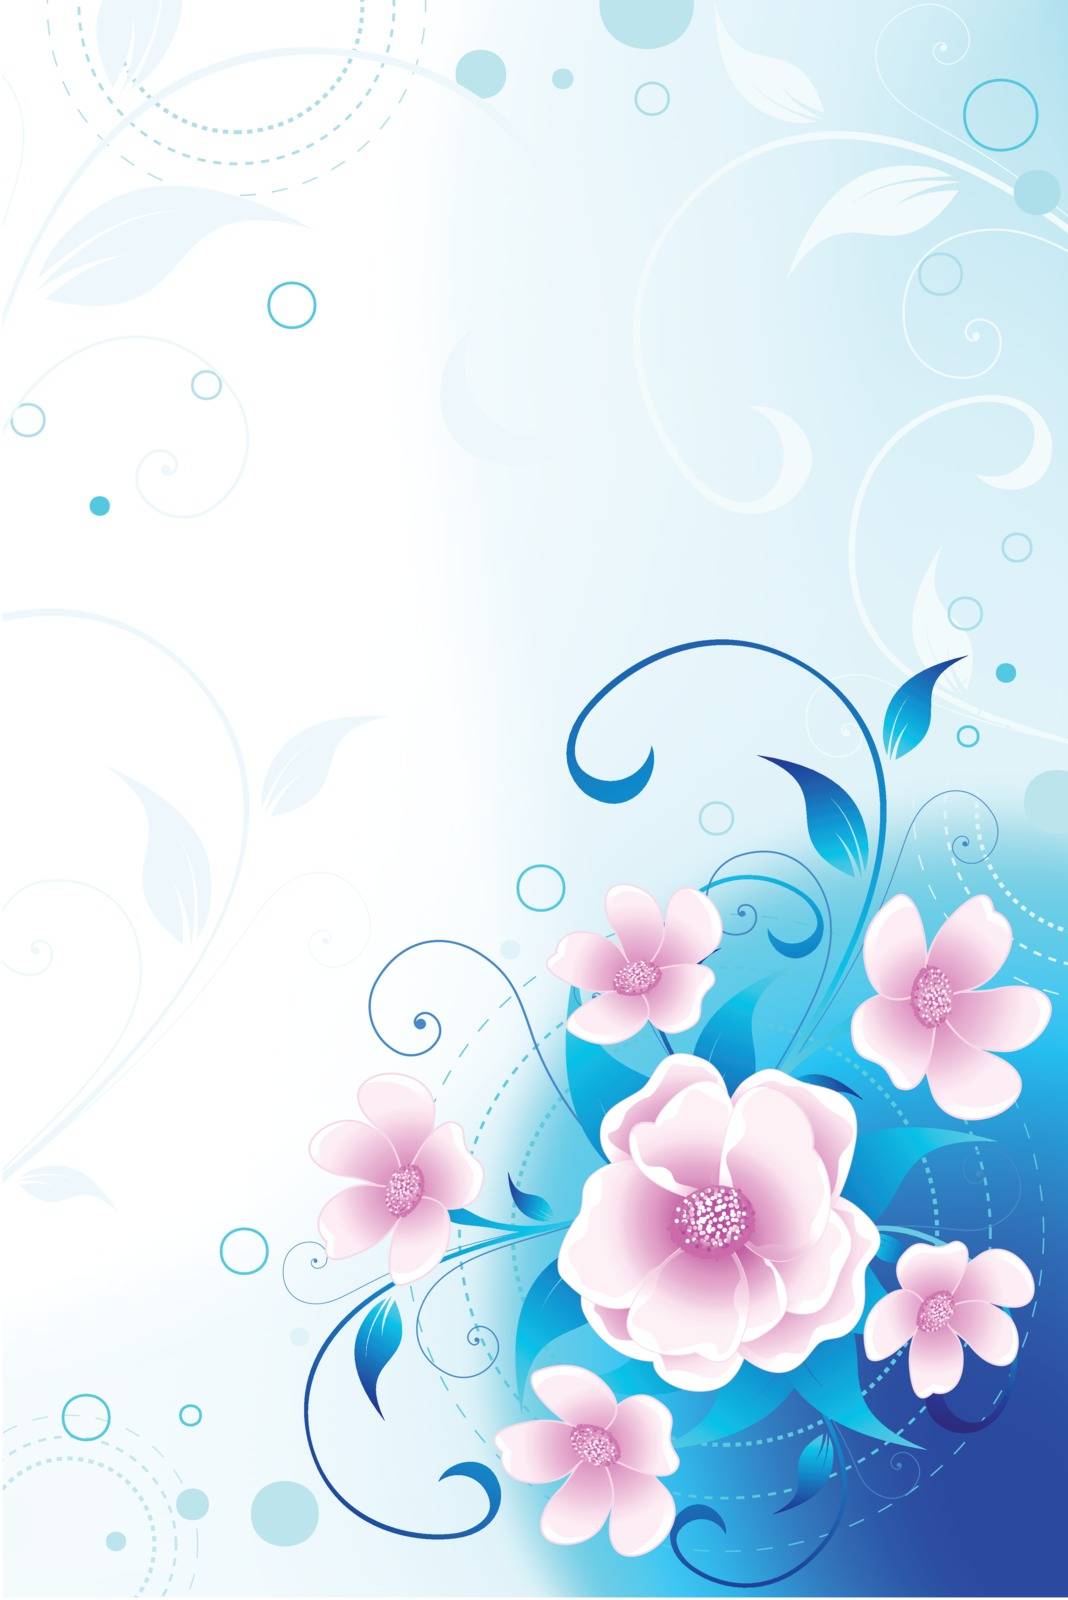 Abstract modern floral background for your design